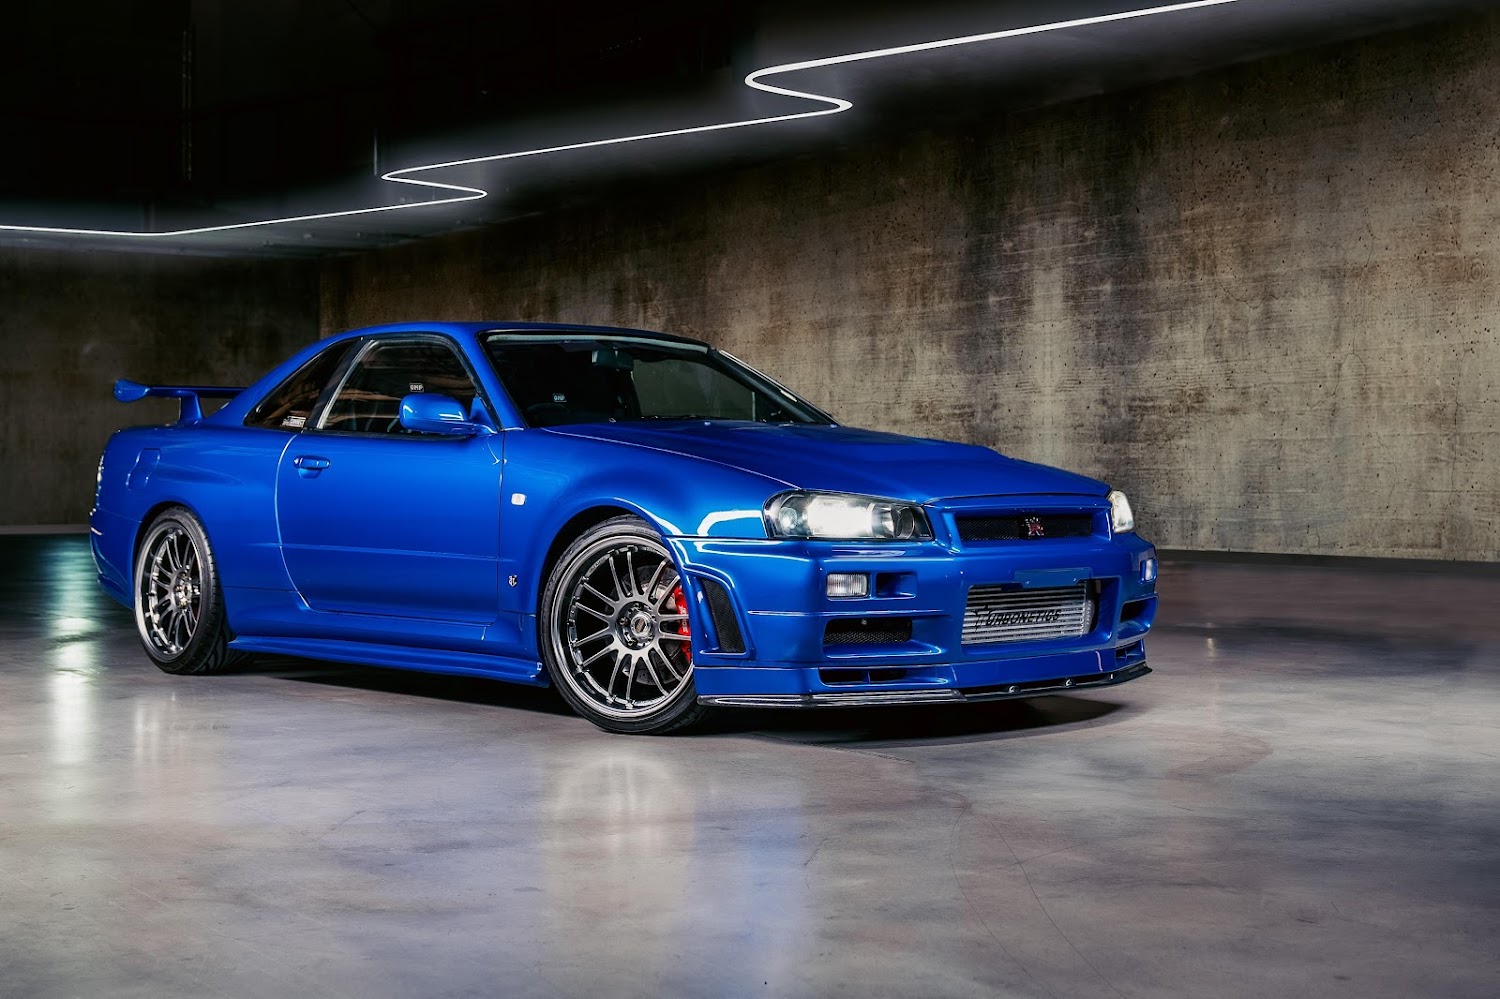 7 astonishing facts about Nissan Skyline GT-R R34